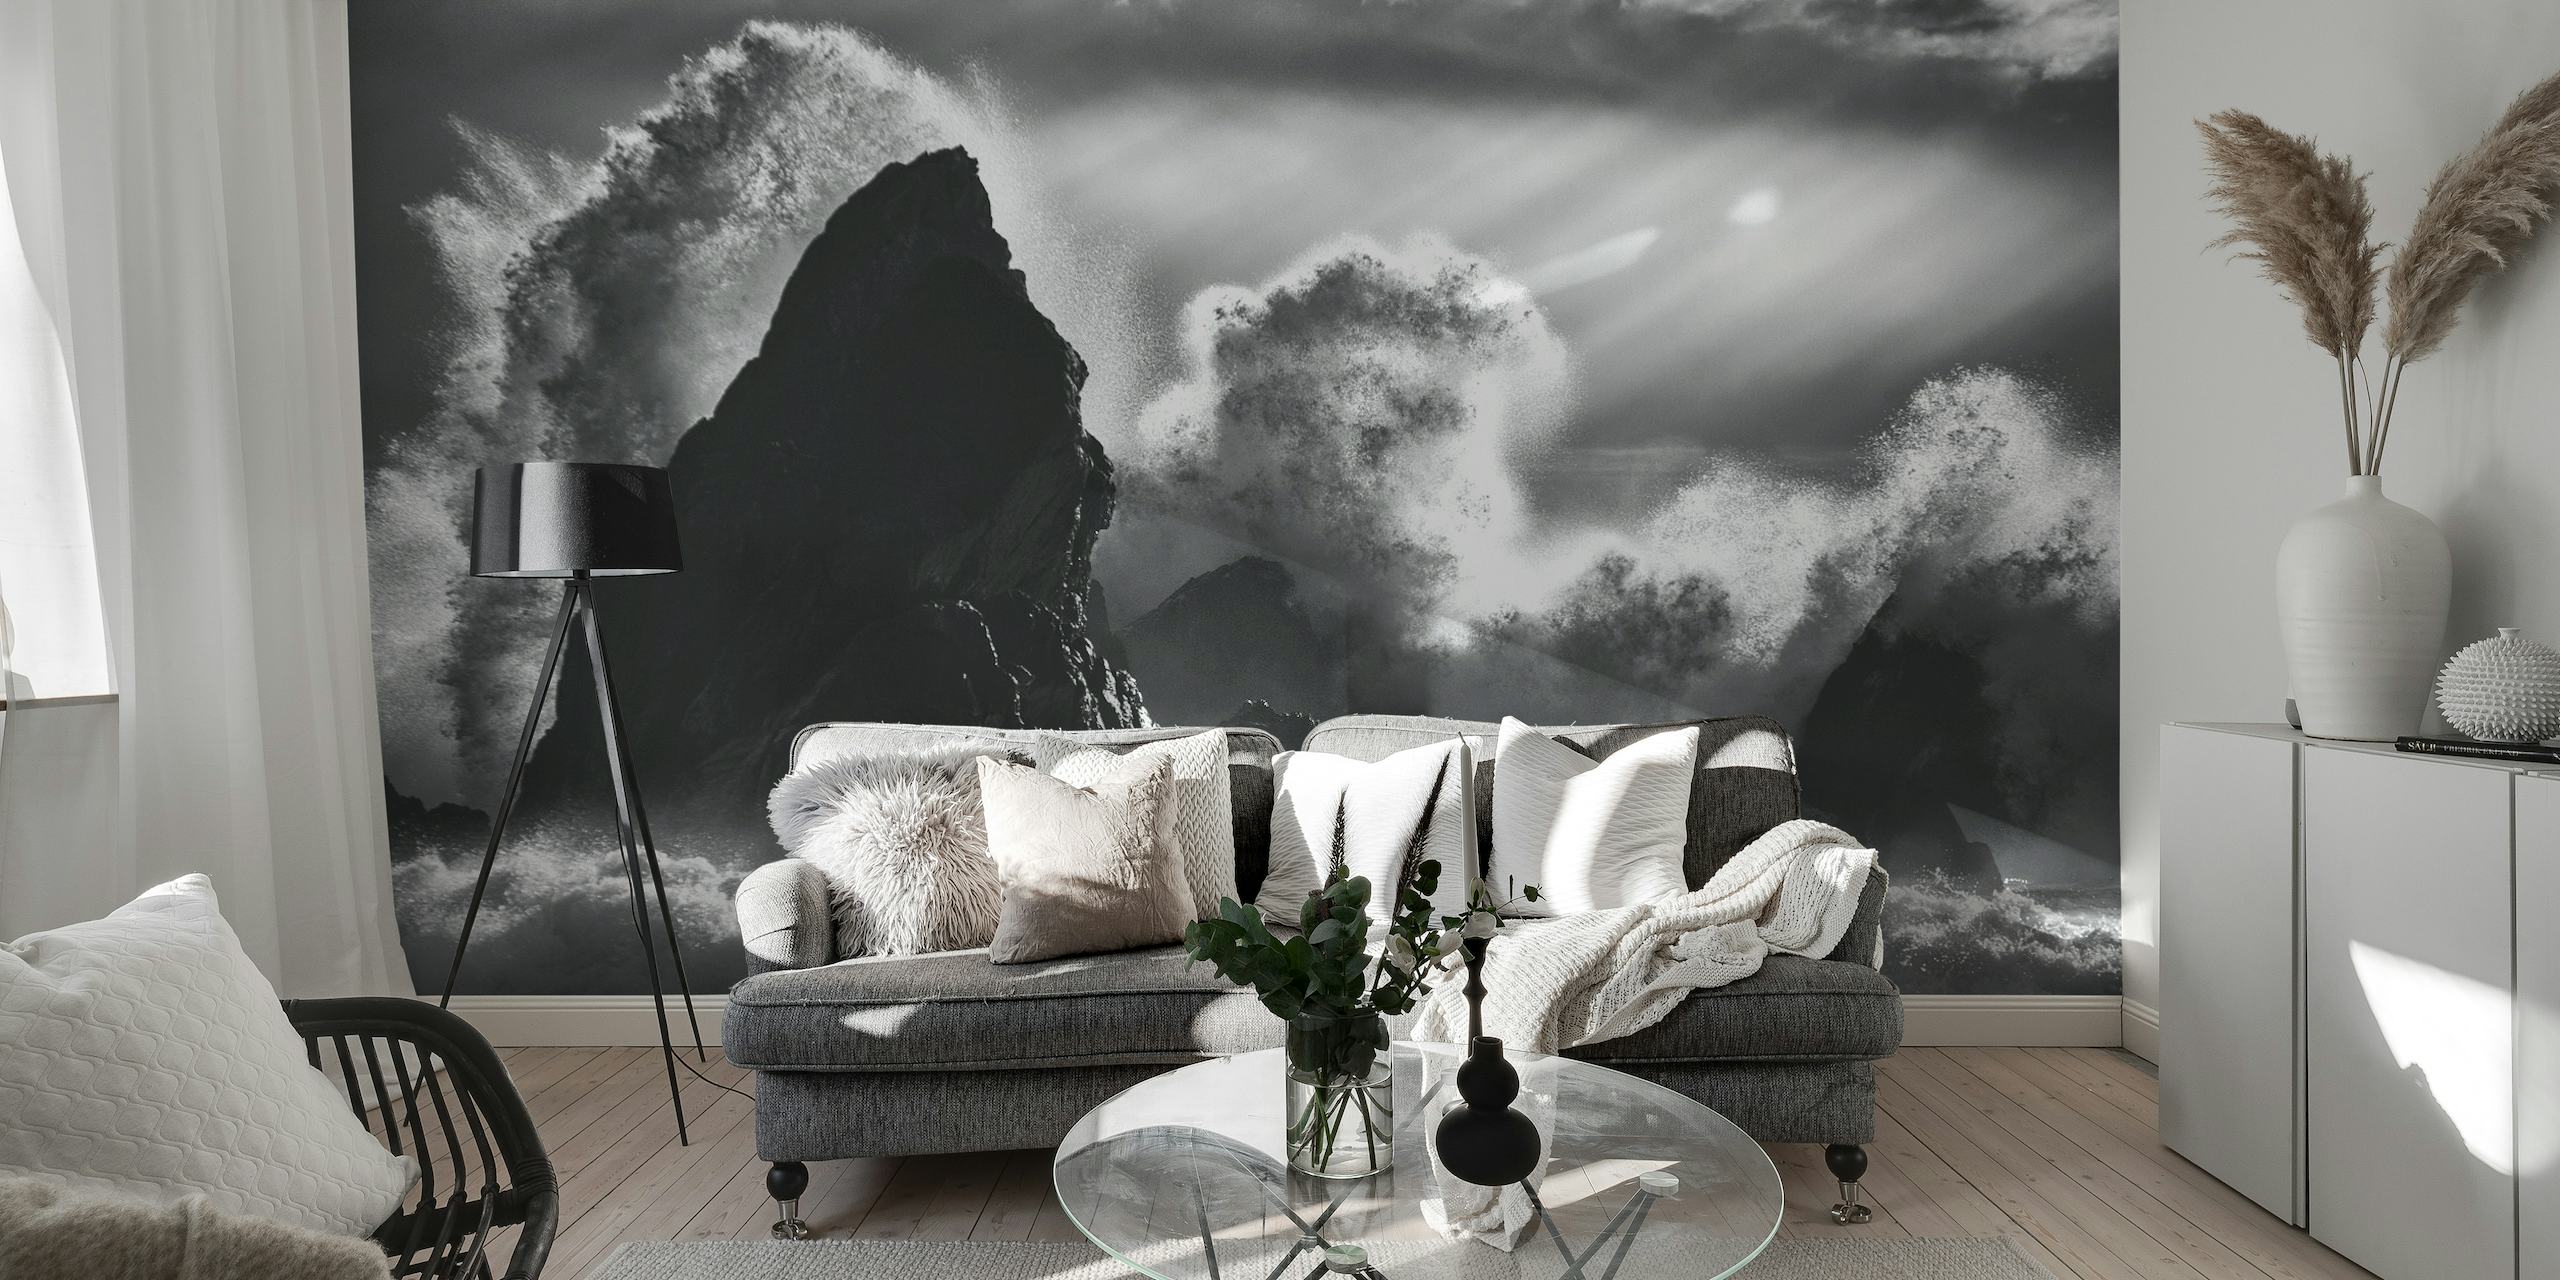 Monochrome wall mural of towering ocean waves with a dramatic sky